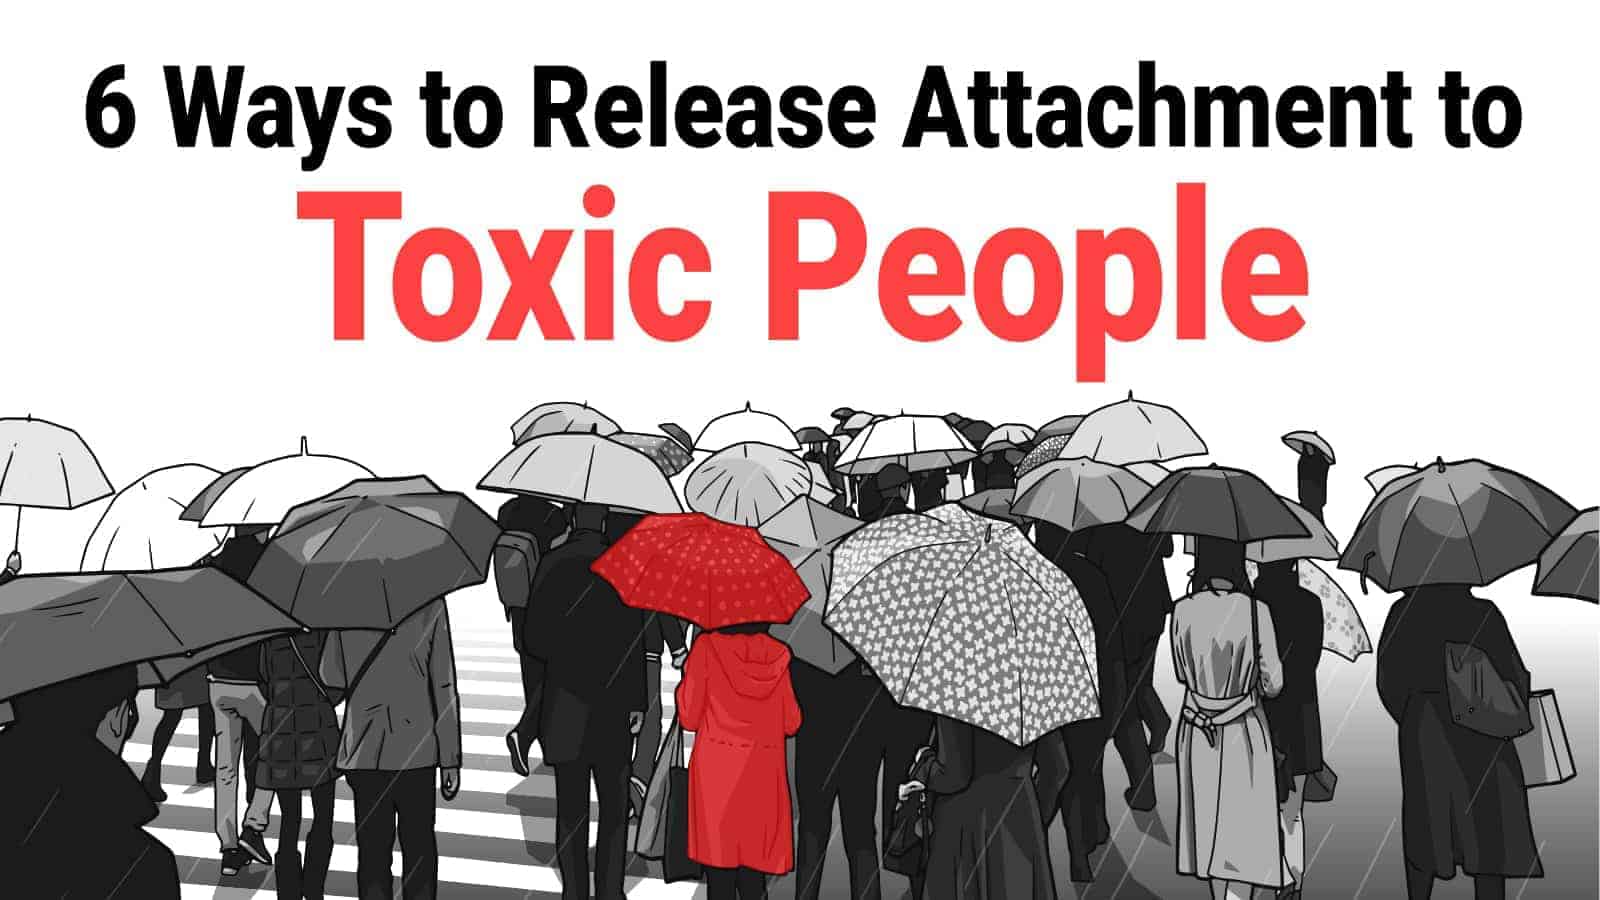 6 Ways to Release Attachment to Toxic People